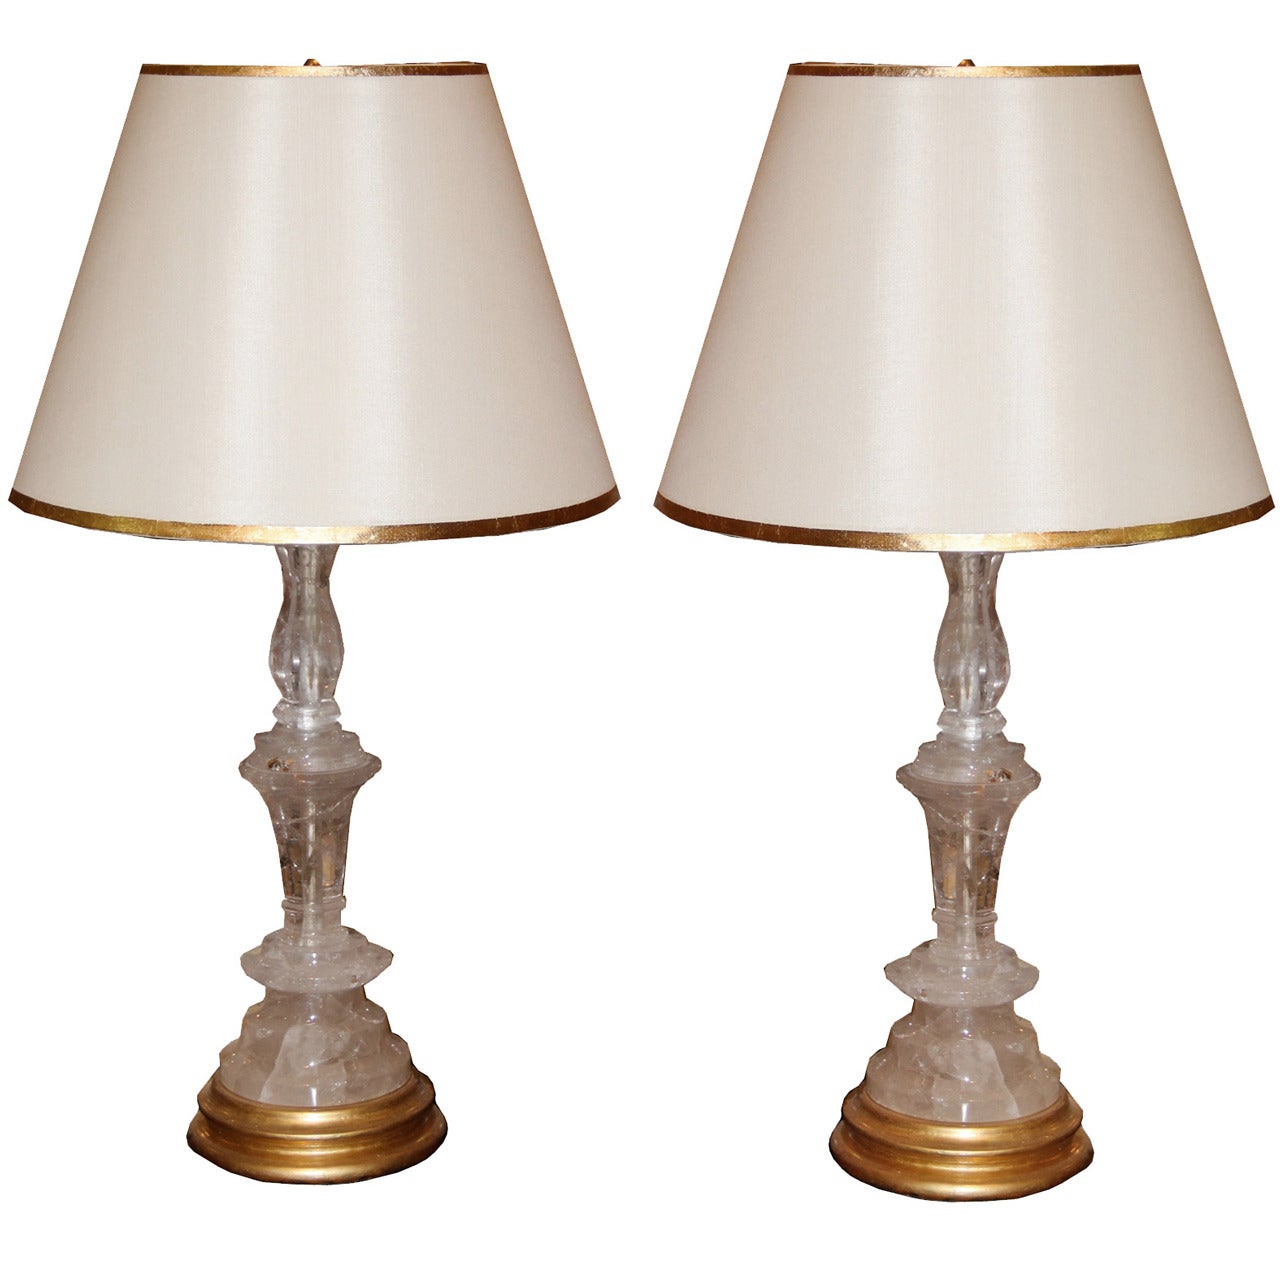 Pair of Rock Crystal Candlesticks Now Converted Into Table Lamps For Sale